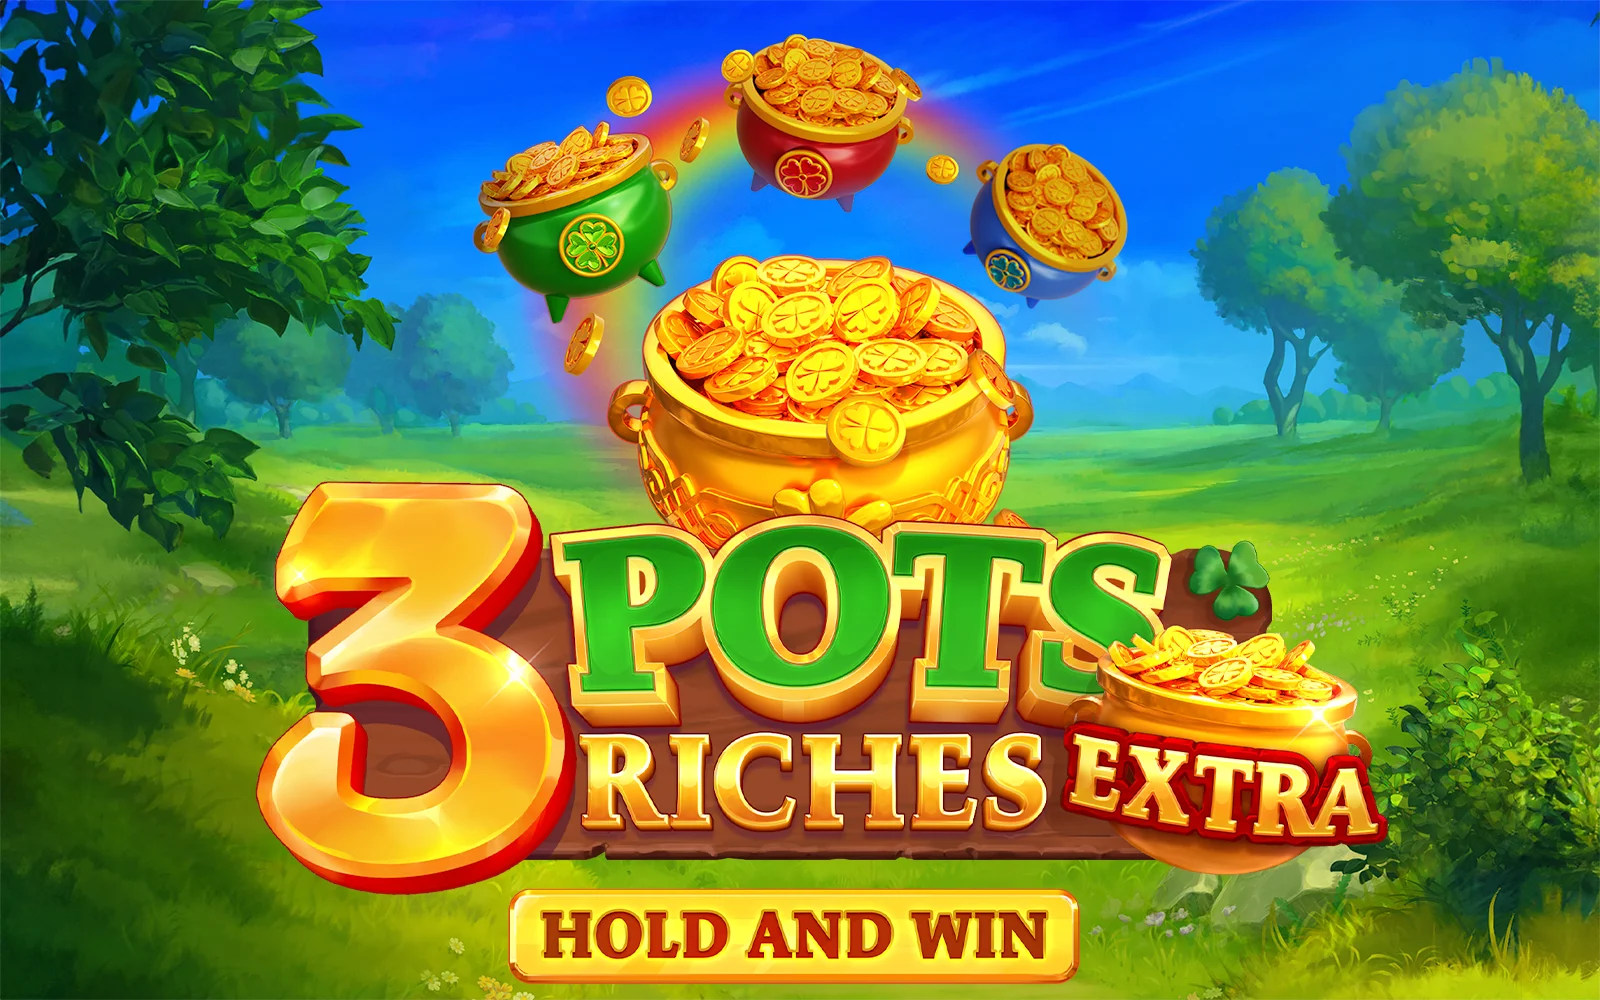 Play 3 Pots Riches Extra: Hold and Win on Starcasino.be online casino